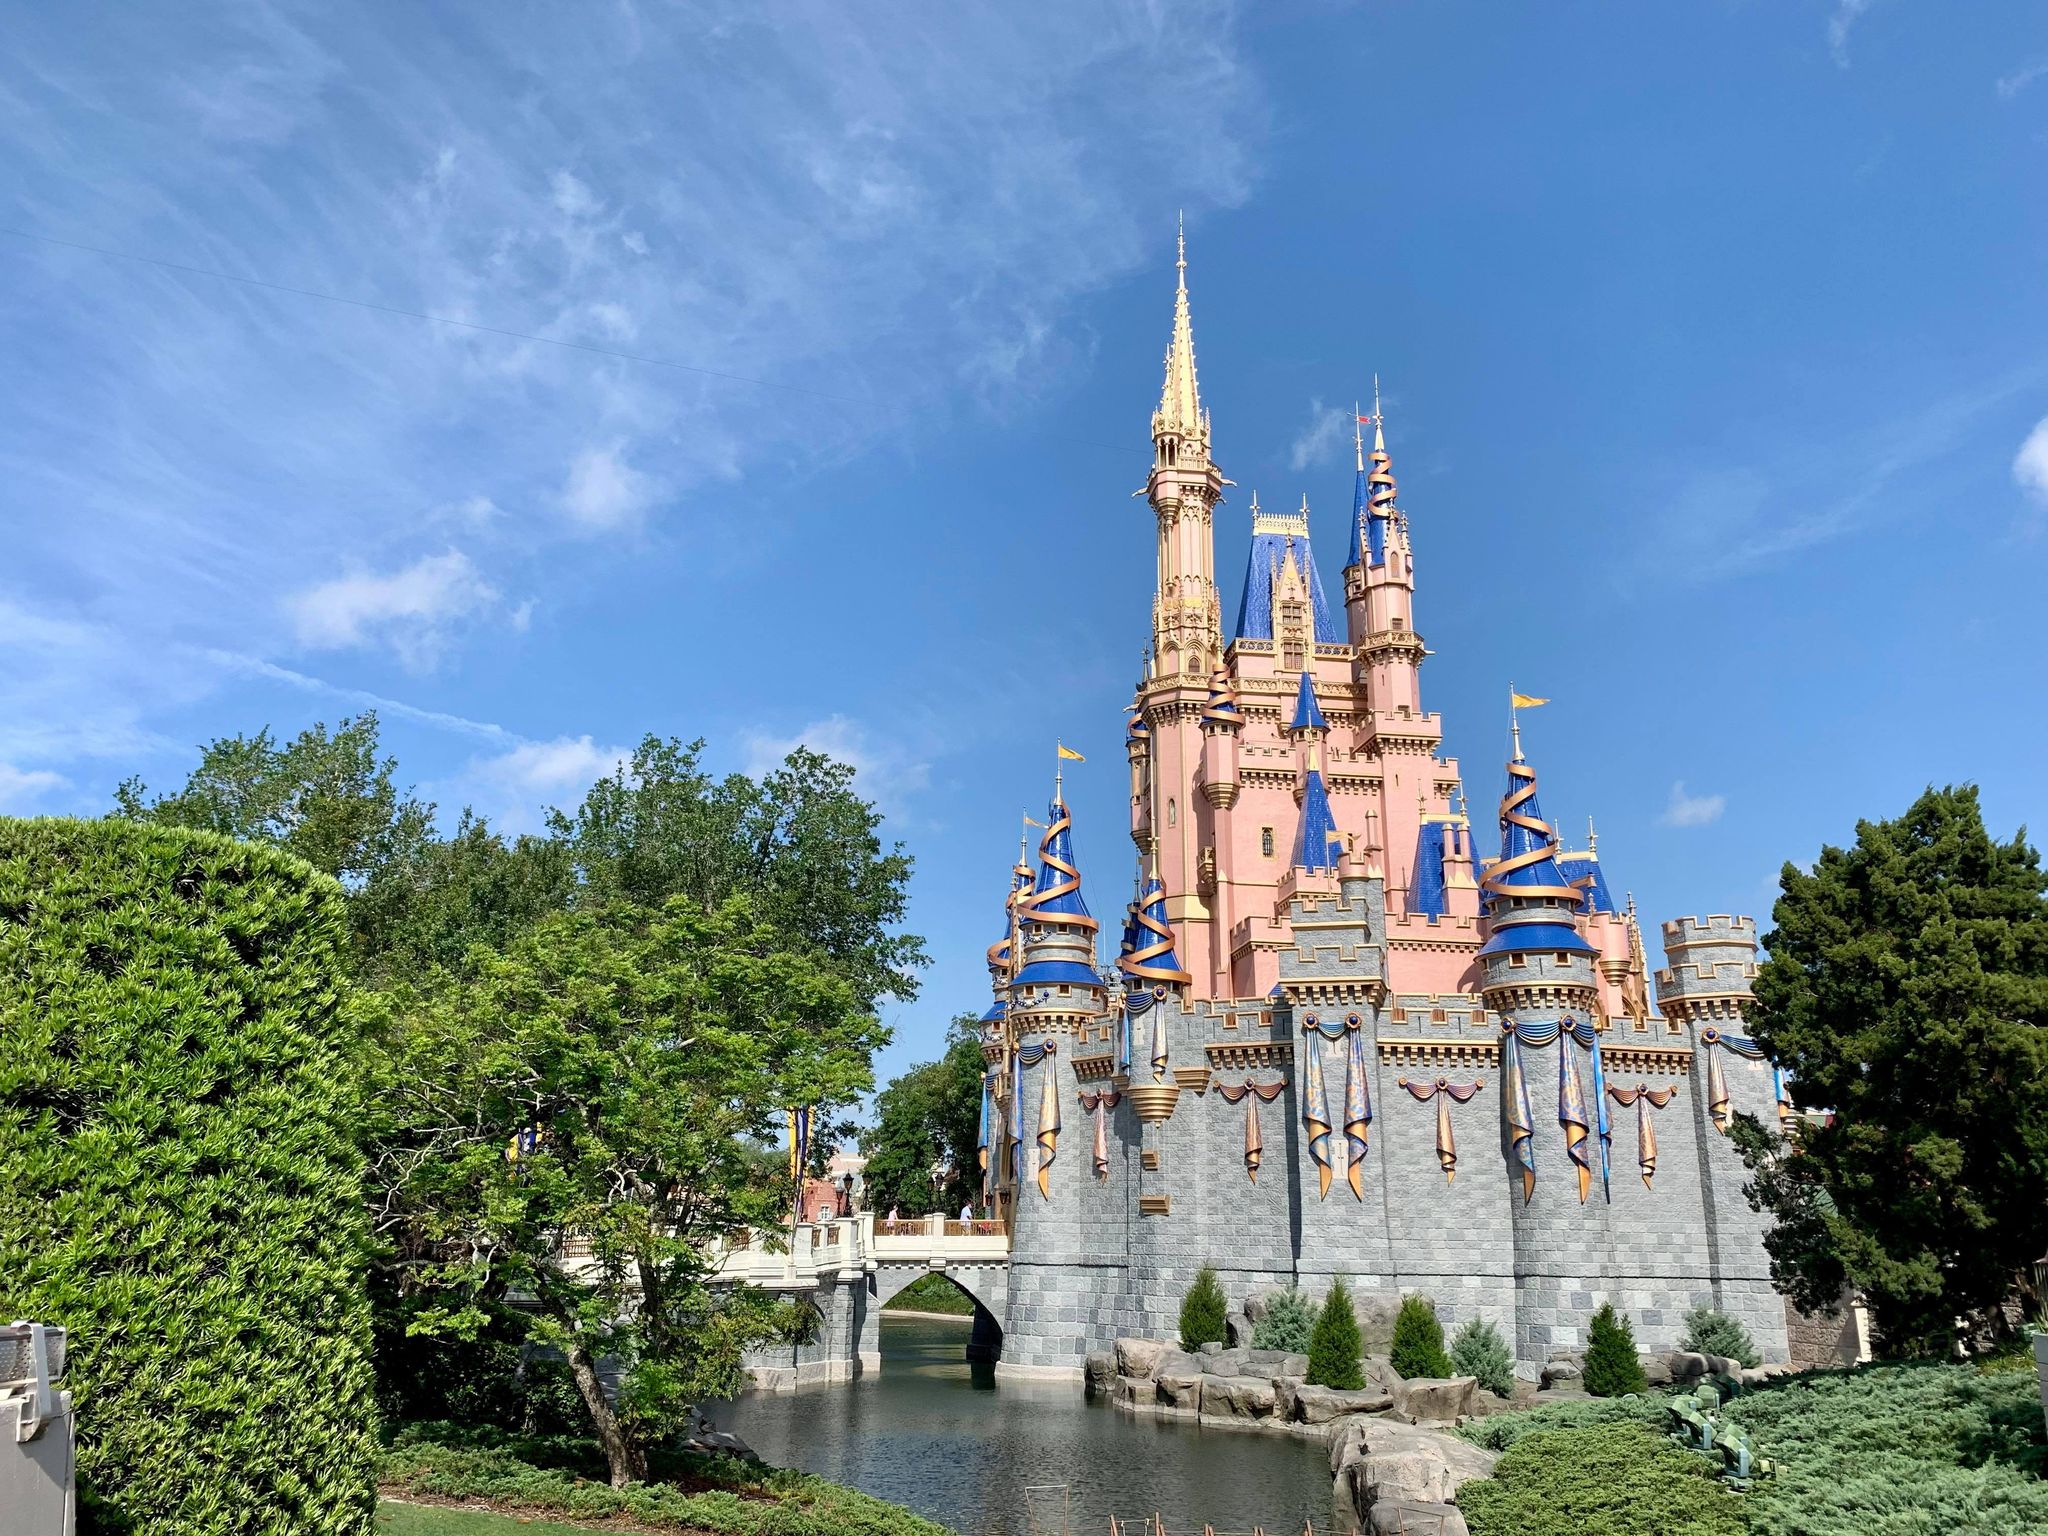 Cinderella Castle Moat being refilled as work completes